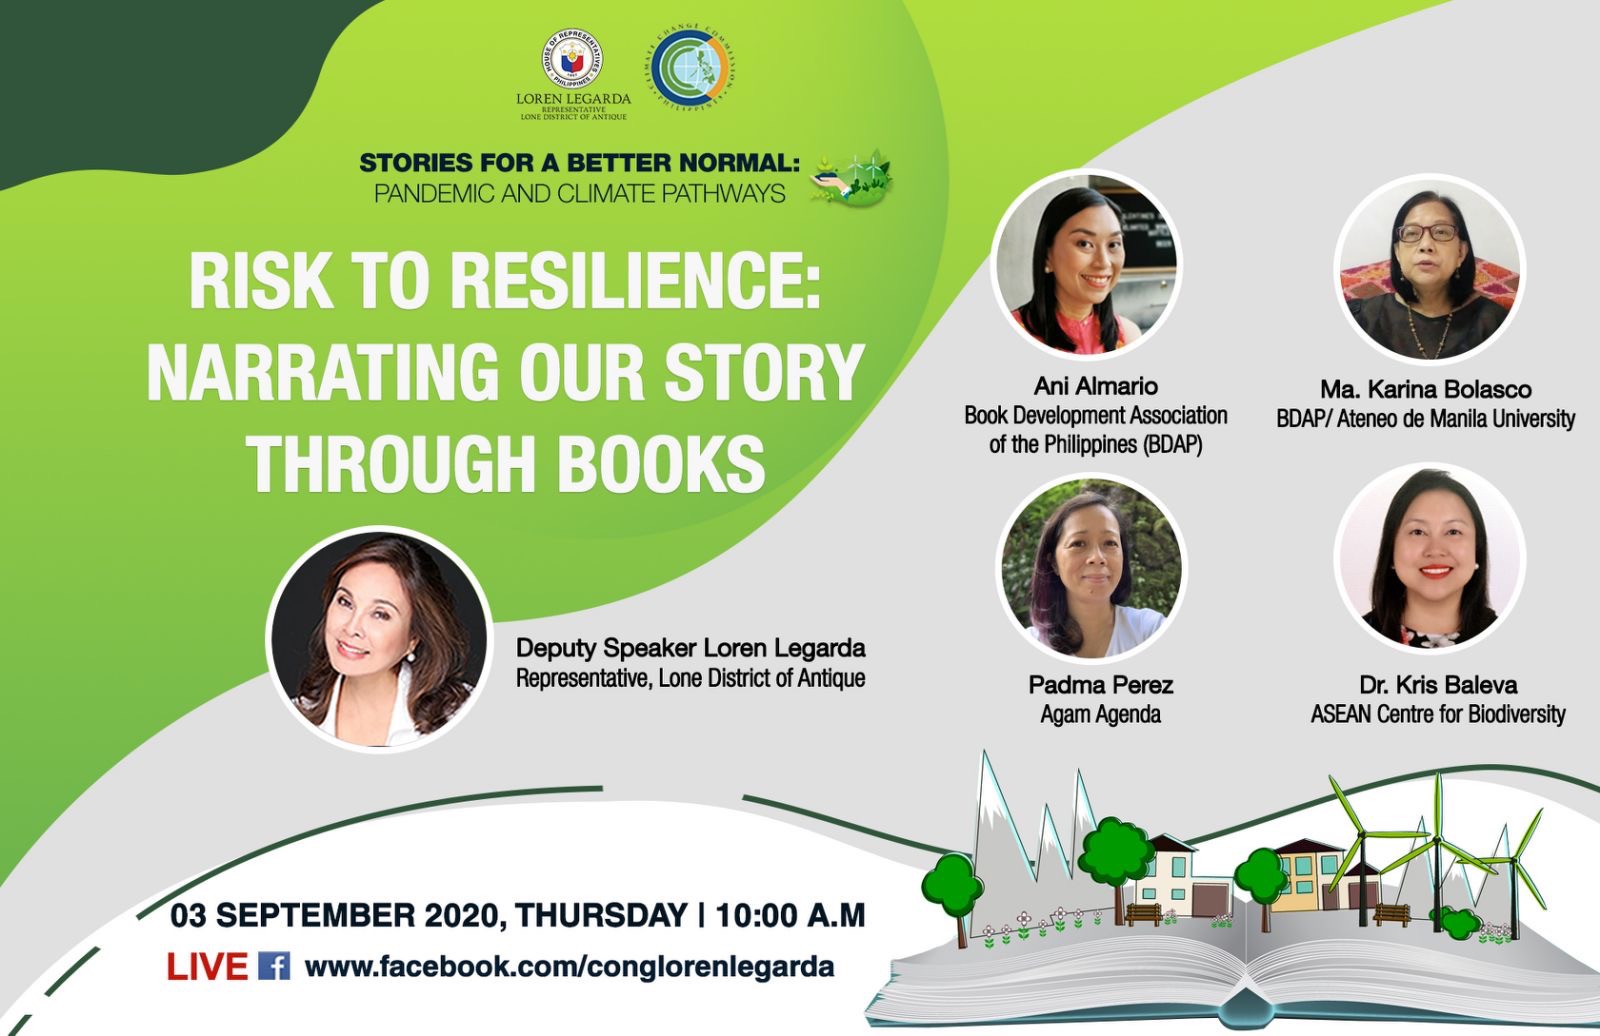 Risk to Resilience: Narrating Our Story through Books in 16th Episode of “Stories for a Better Normal” Series